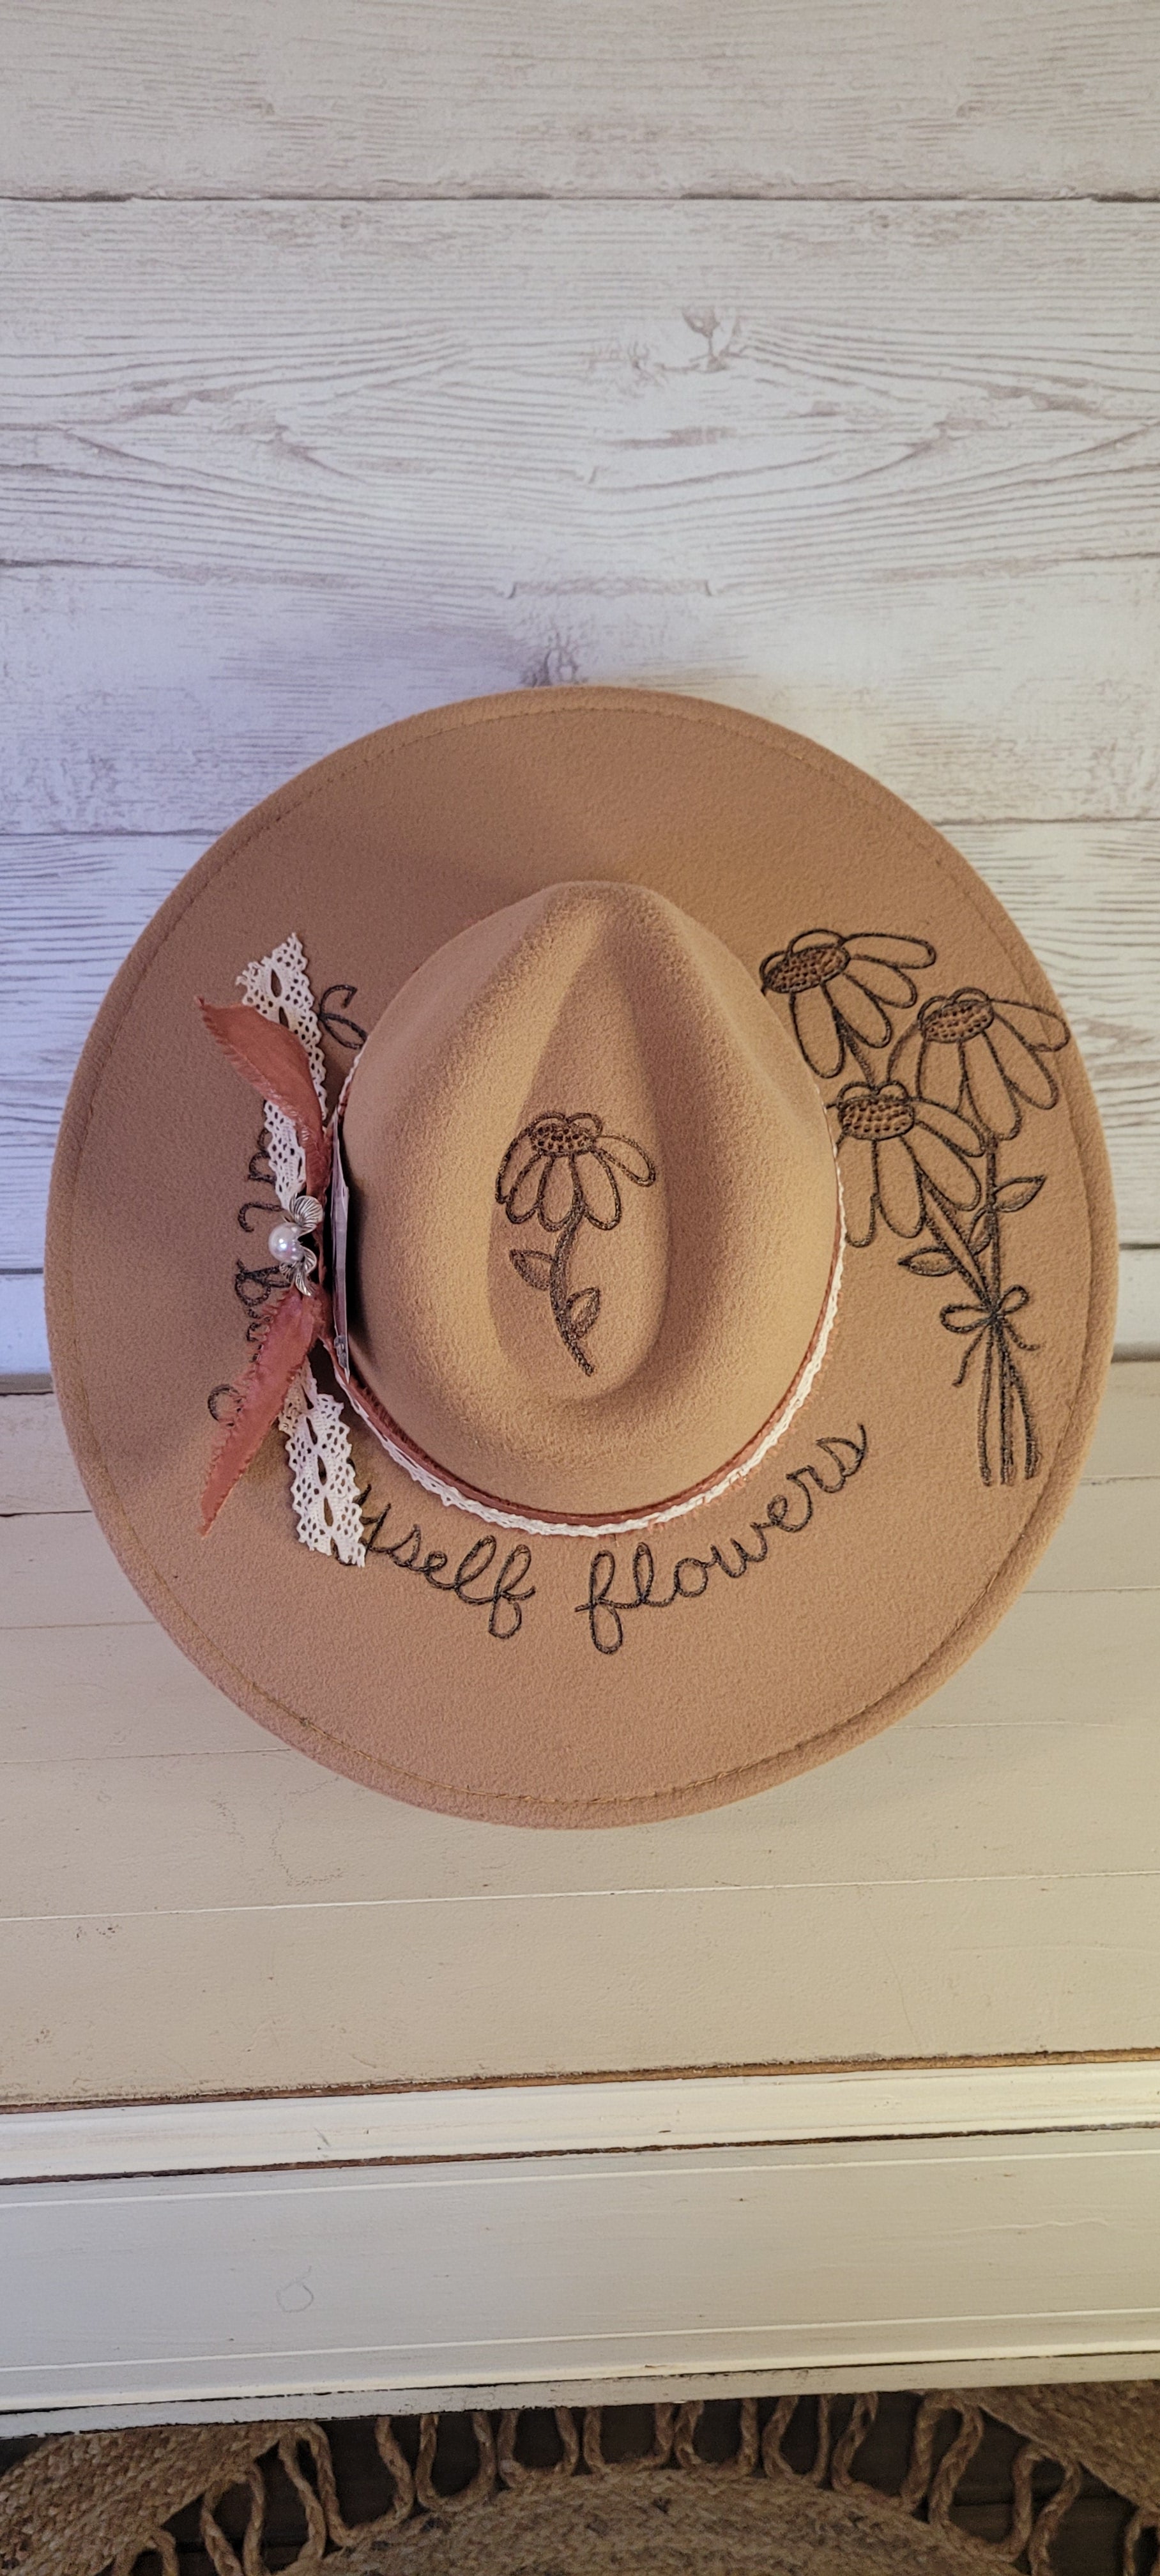 Features "I can by myself flowers" & flowers engraved Frayed rose ribbon, natural lace ribbon with flower brooch & playing card Felt hat Flat brim 65% polyester and 35% cotton Ribbon drawstring for hat size adjustment Head Circumference: 24" Crown Height: 5" Brim Length: 15.75" Brim Width: 14.5" Branded & numbered inside crown Custom burned & engraved by Kayla